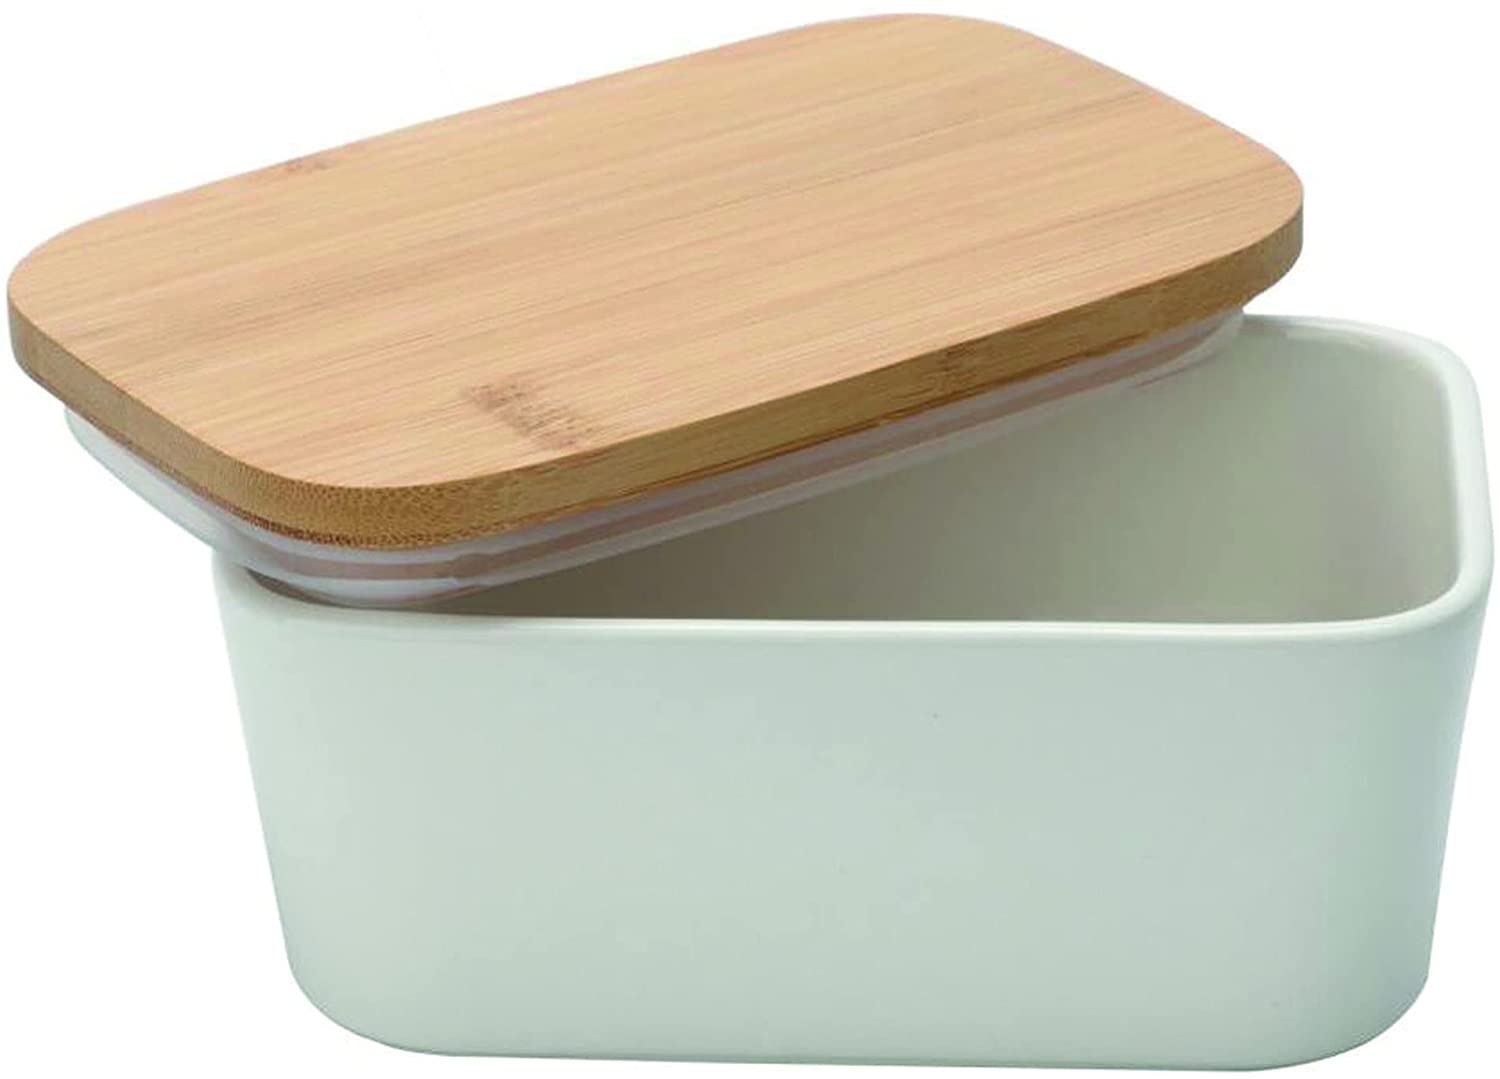 Porcelain Butter Dish With Bamboo Lid